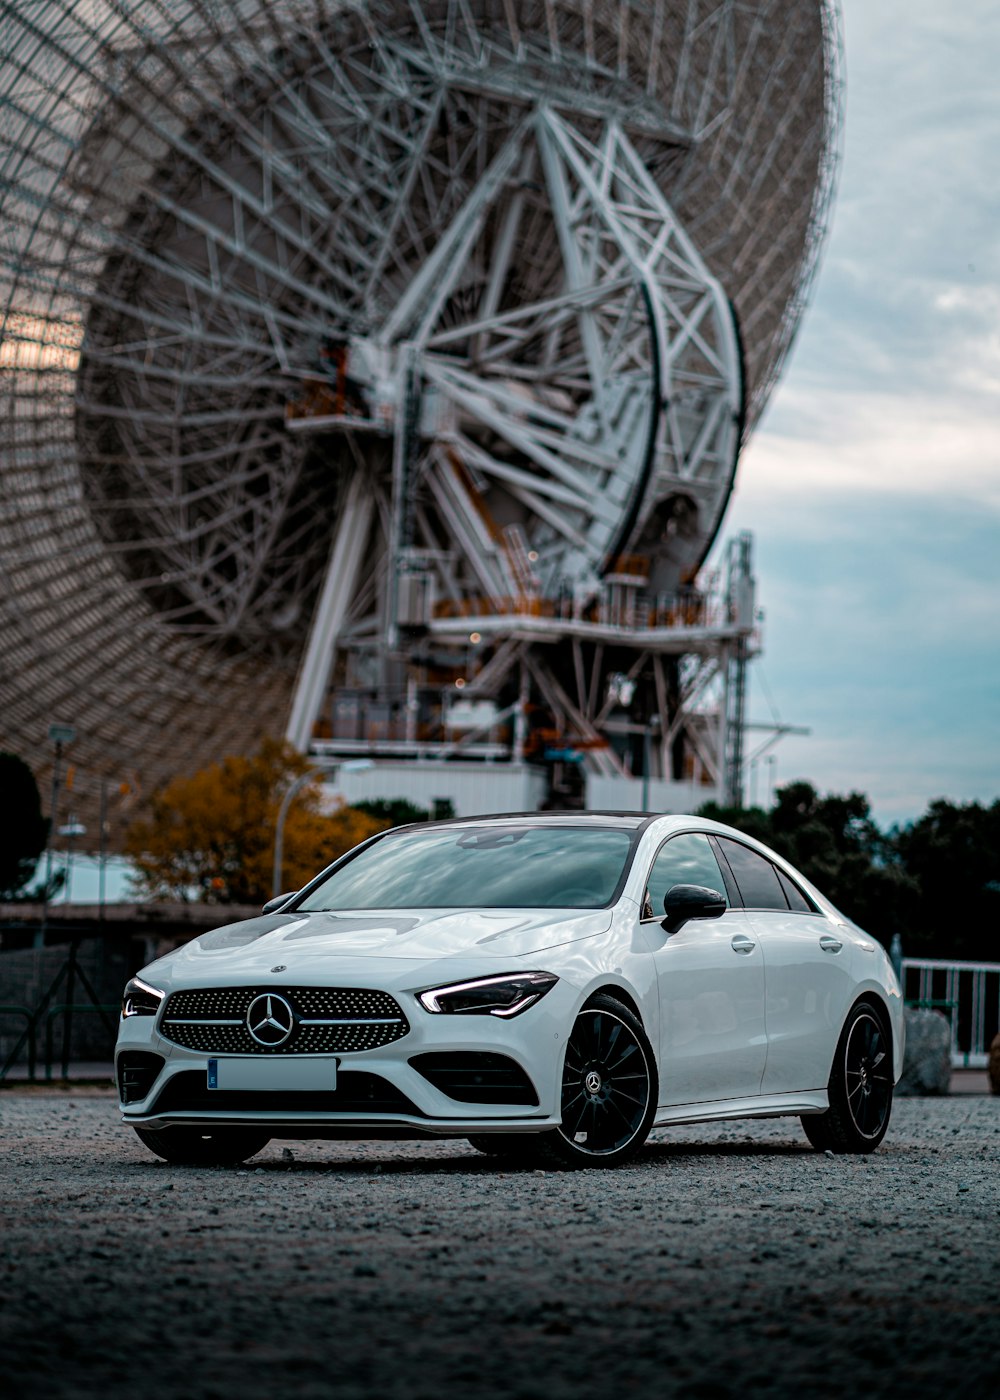 white mercedes benz coupe parked near ferris wheel during daytime